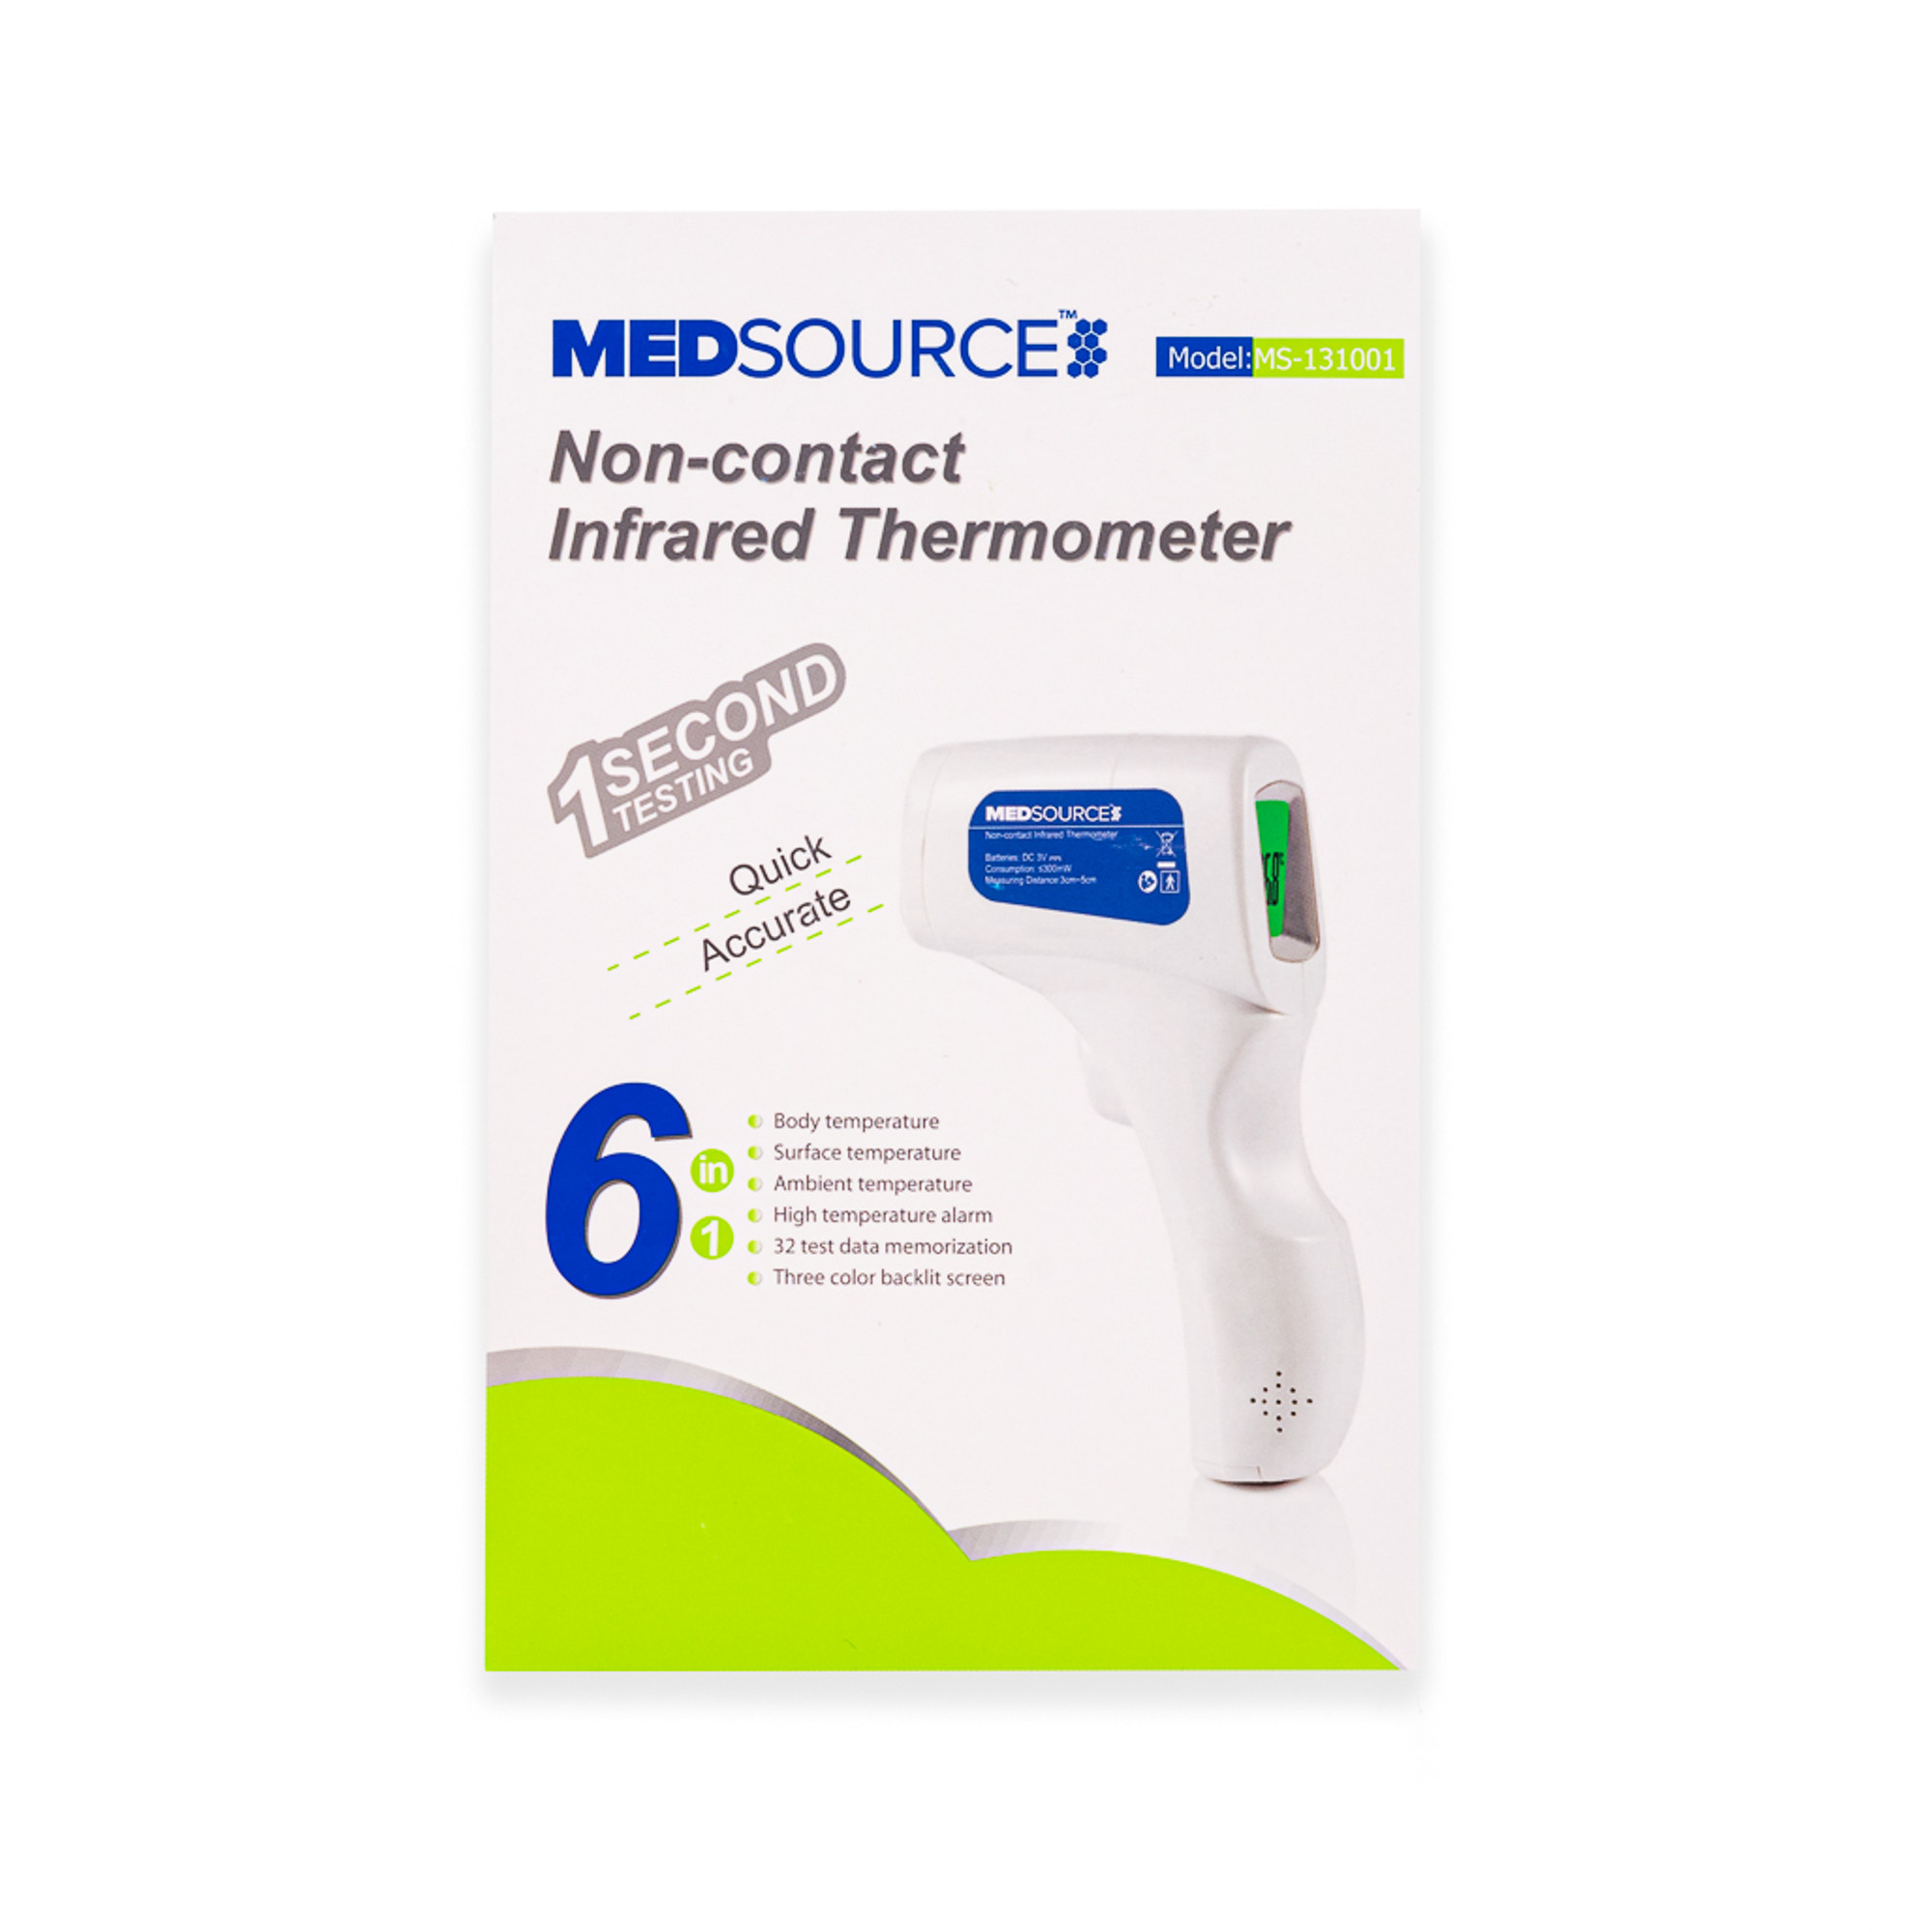 https://cdn11.bigcommerce.com/s-benodx/images/stencil/2000x2000/products/2870/5518/Non_Contact_Infrared_Thermometer_-_FDA_Approved__59535.1659549493.jpg?c=2